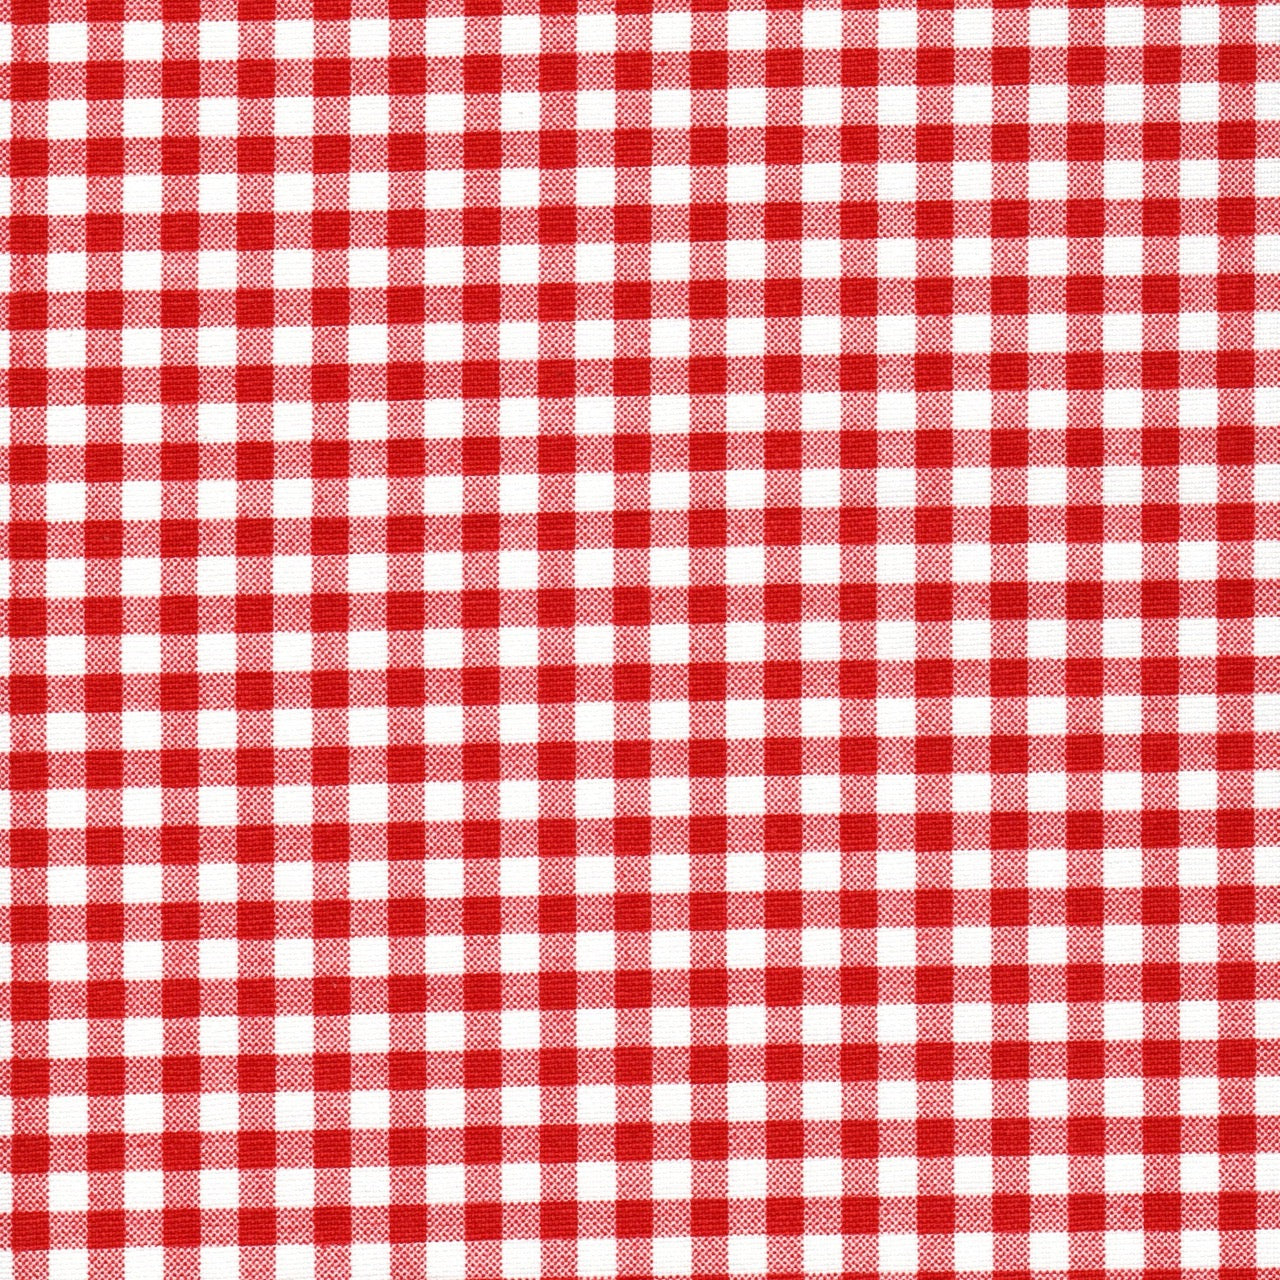 Gathered Bedskirt in Lipstick Red Large Gingham Check on White